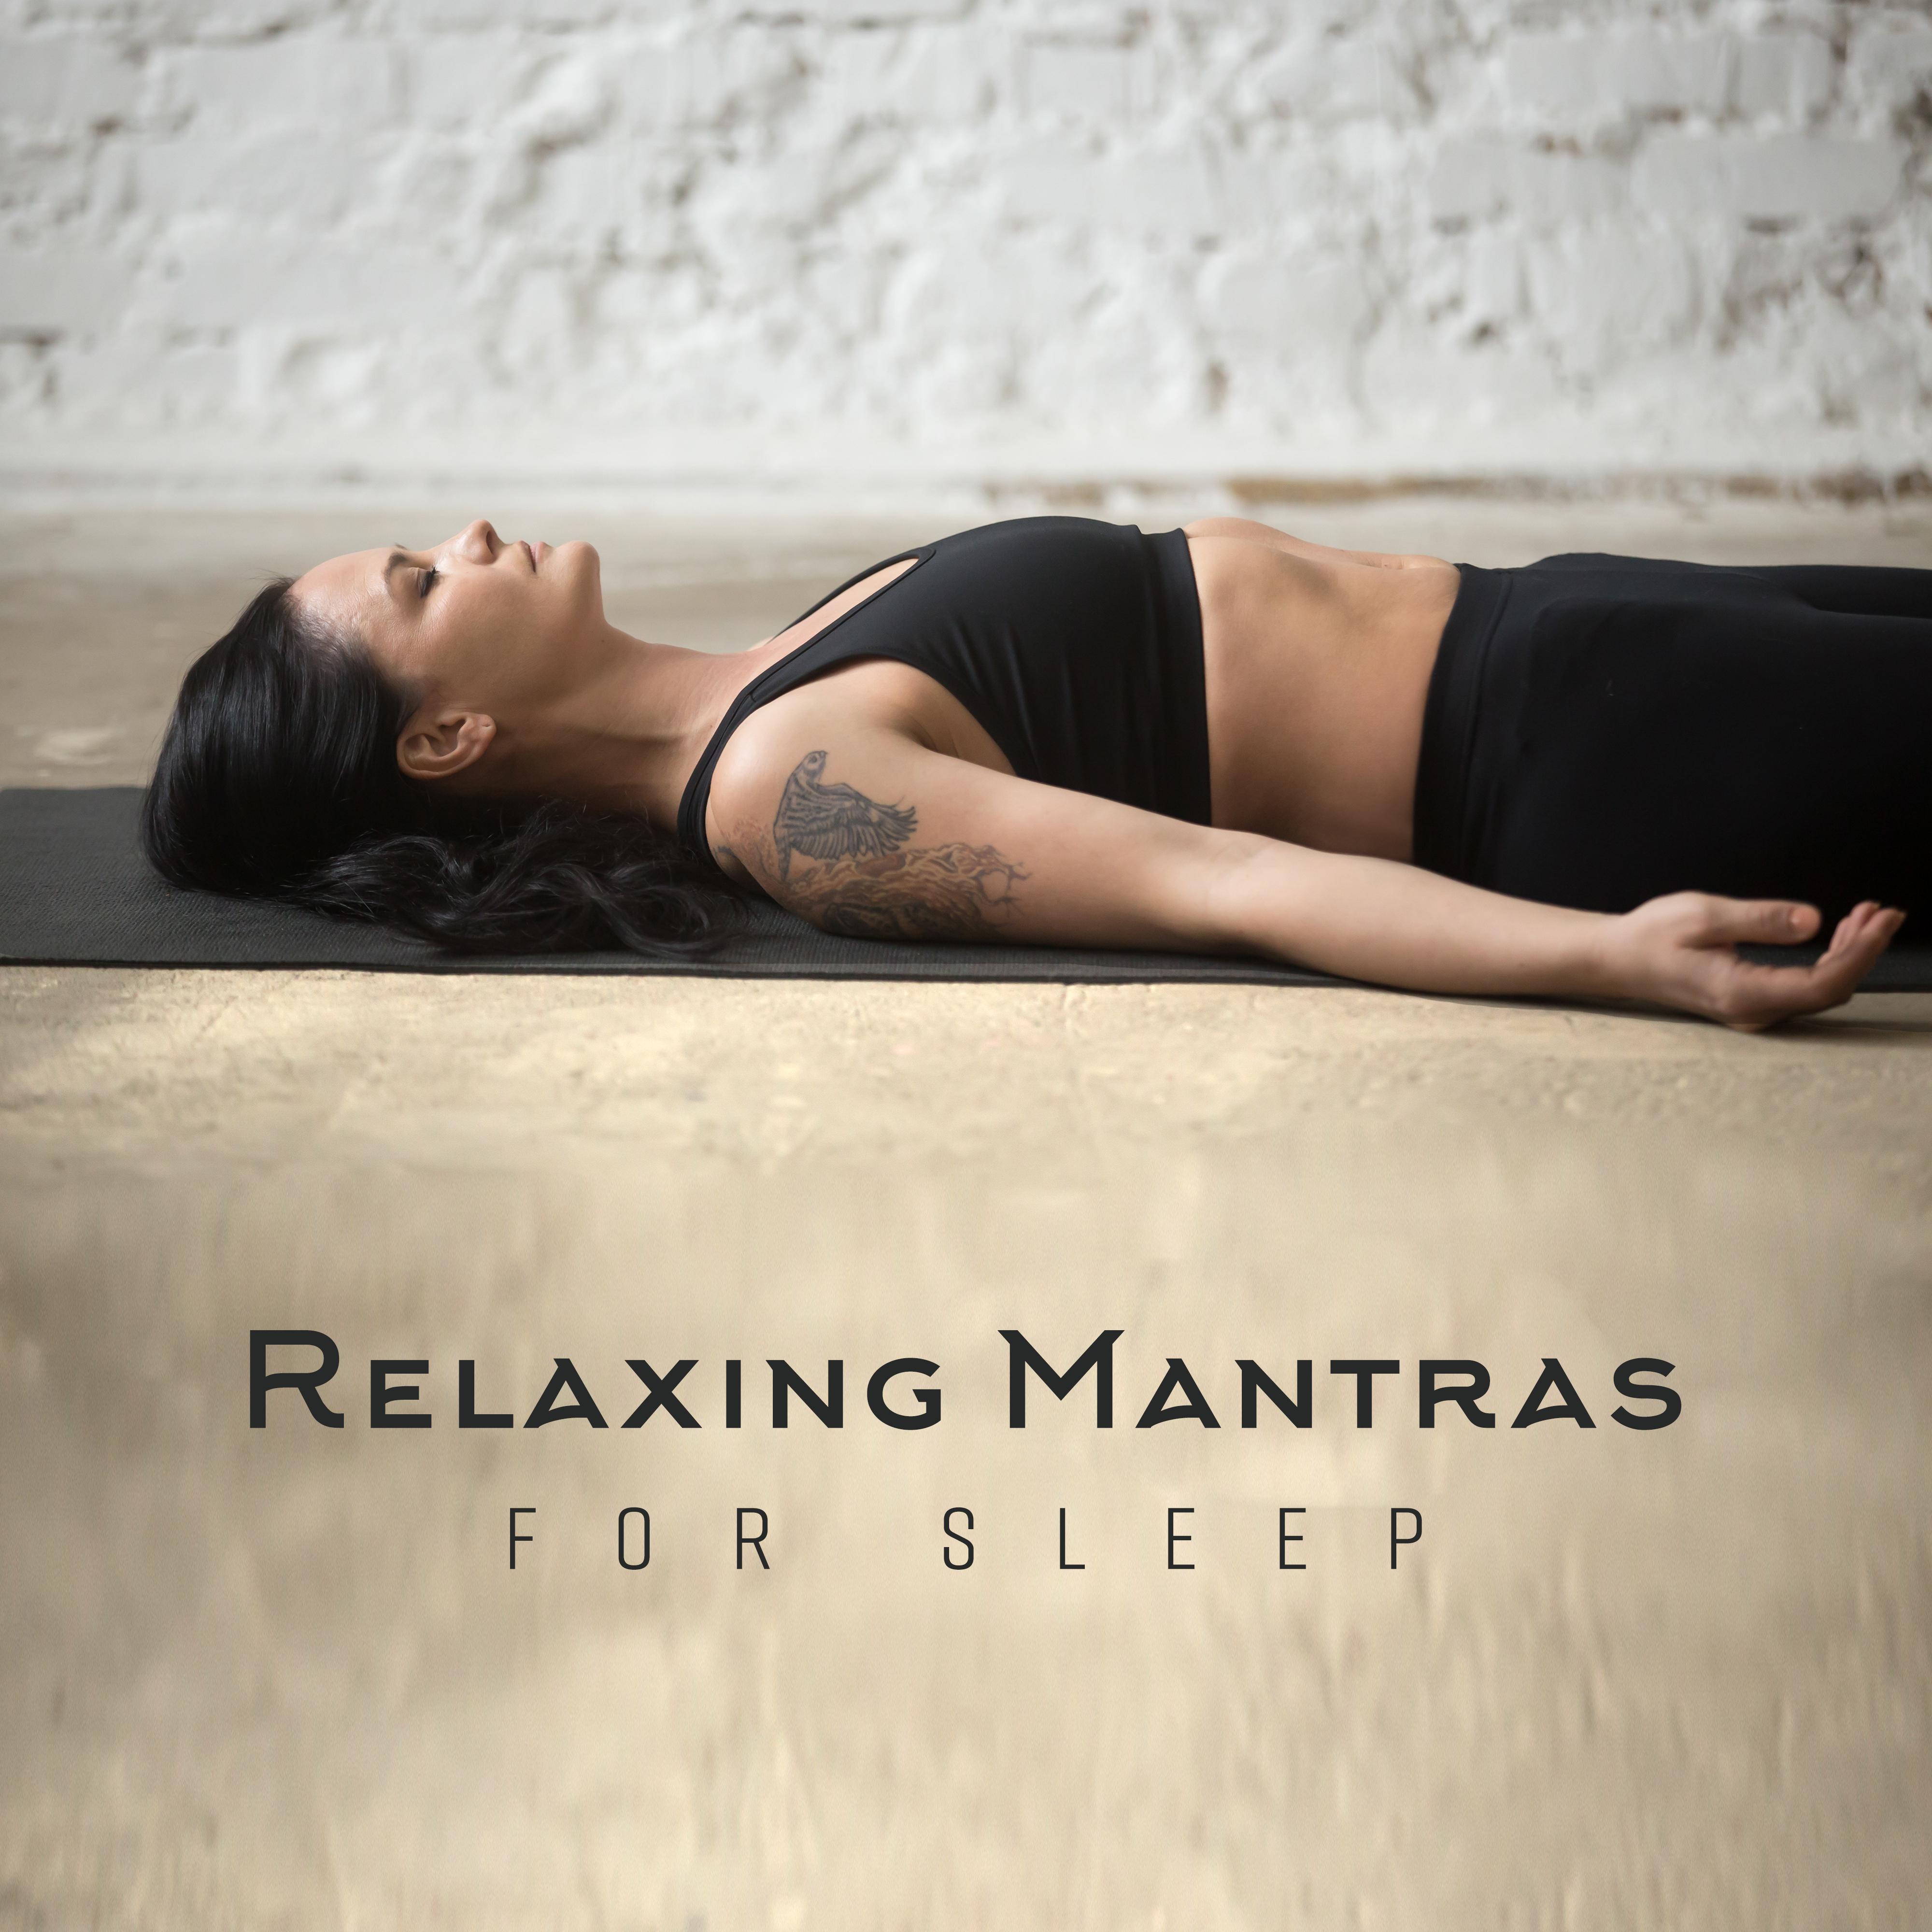 Relaxing Mantras for Sleep